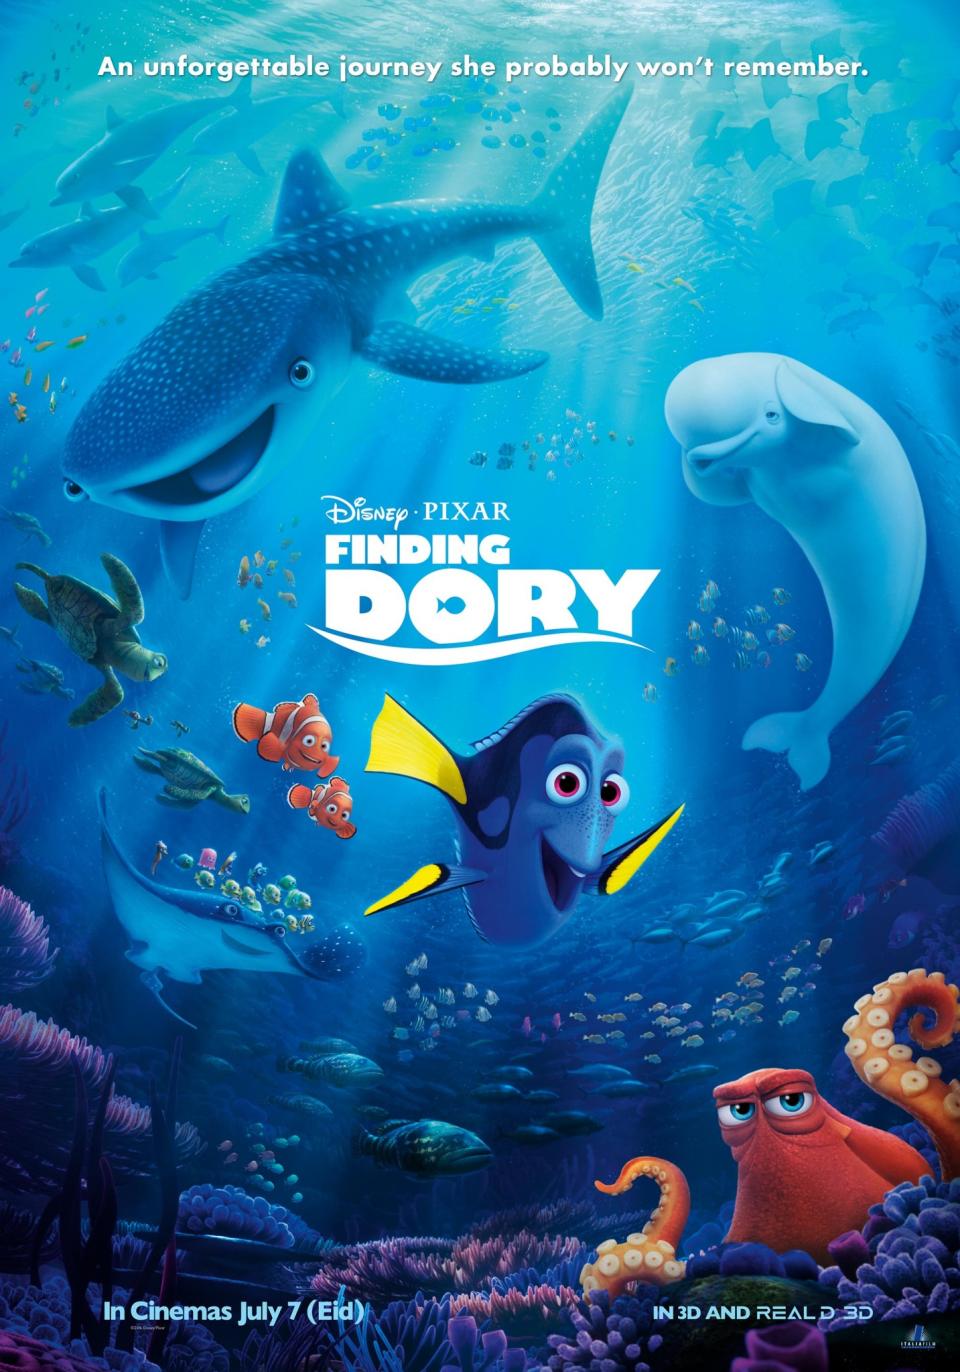 1. Finding Dory